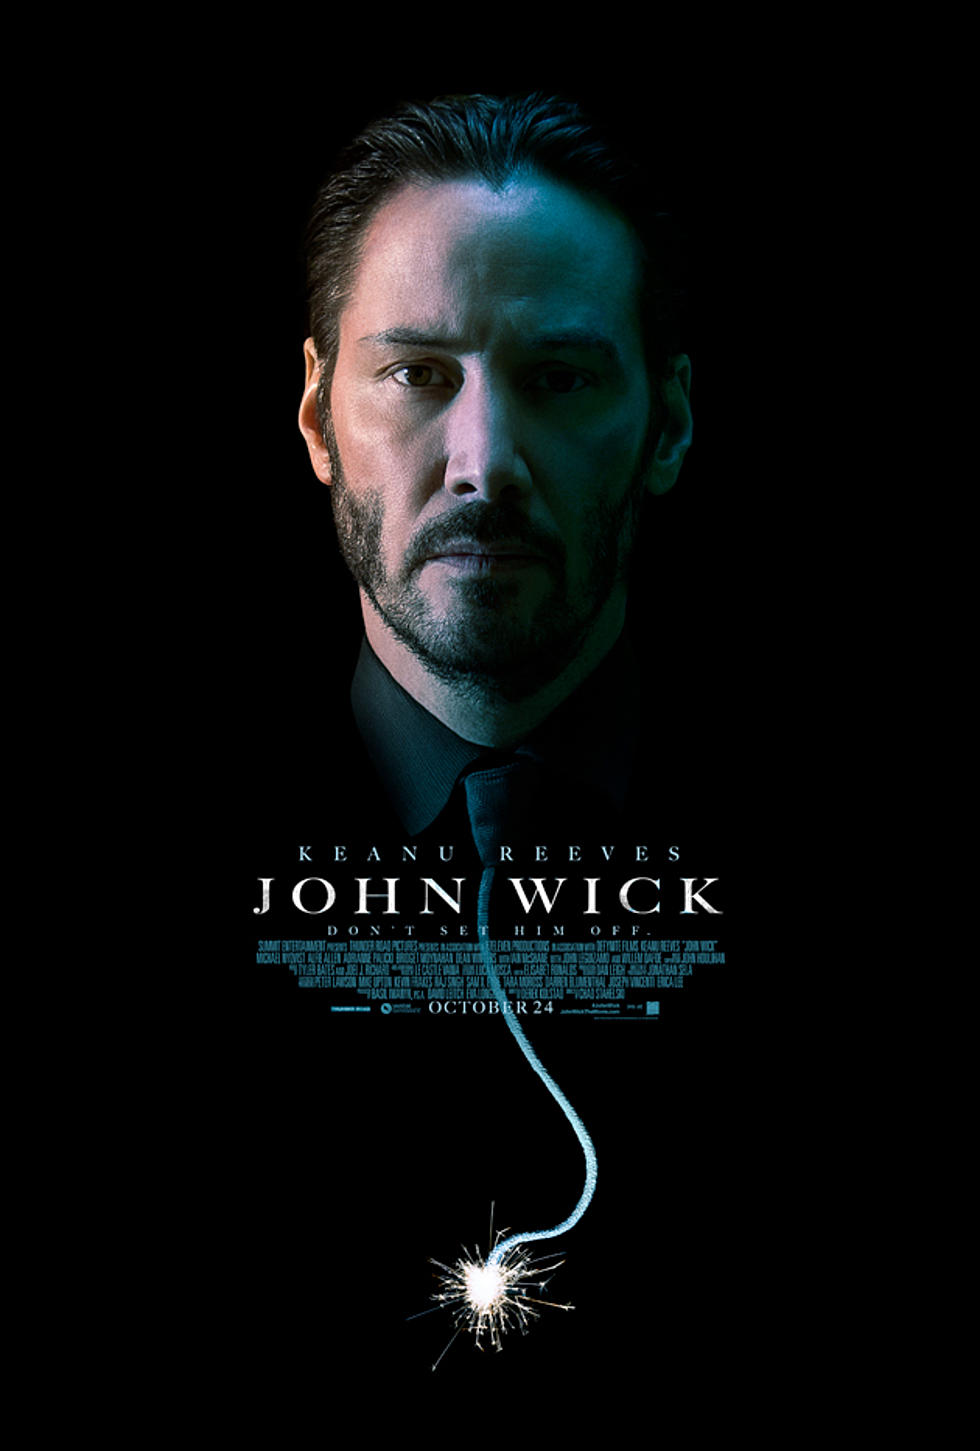 Watch ‘John Wick’ For Free On YouTube And Support Theater Workers